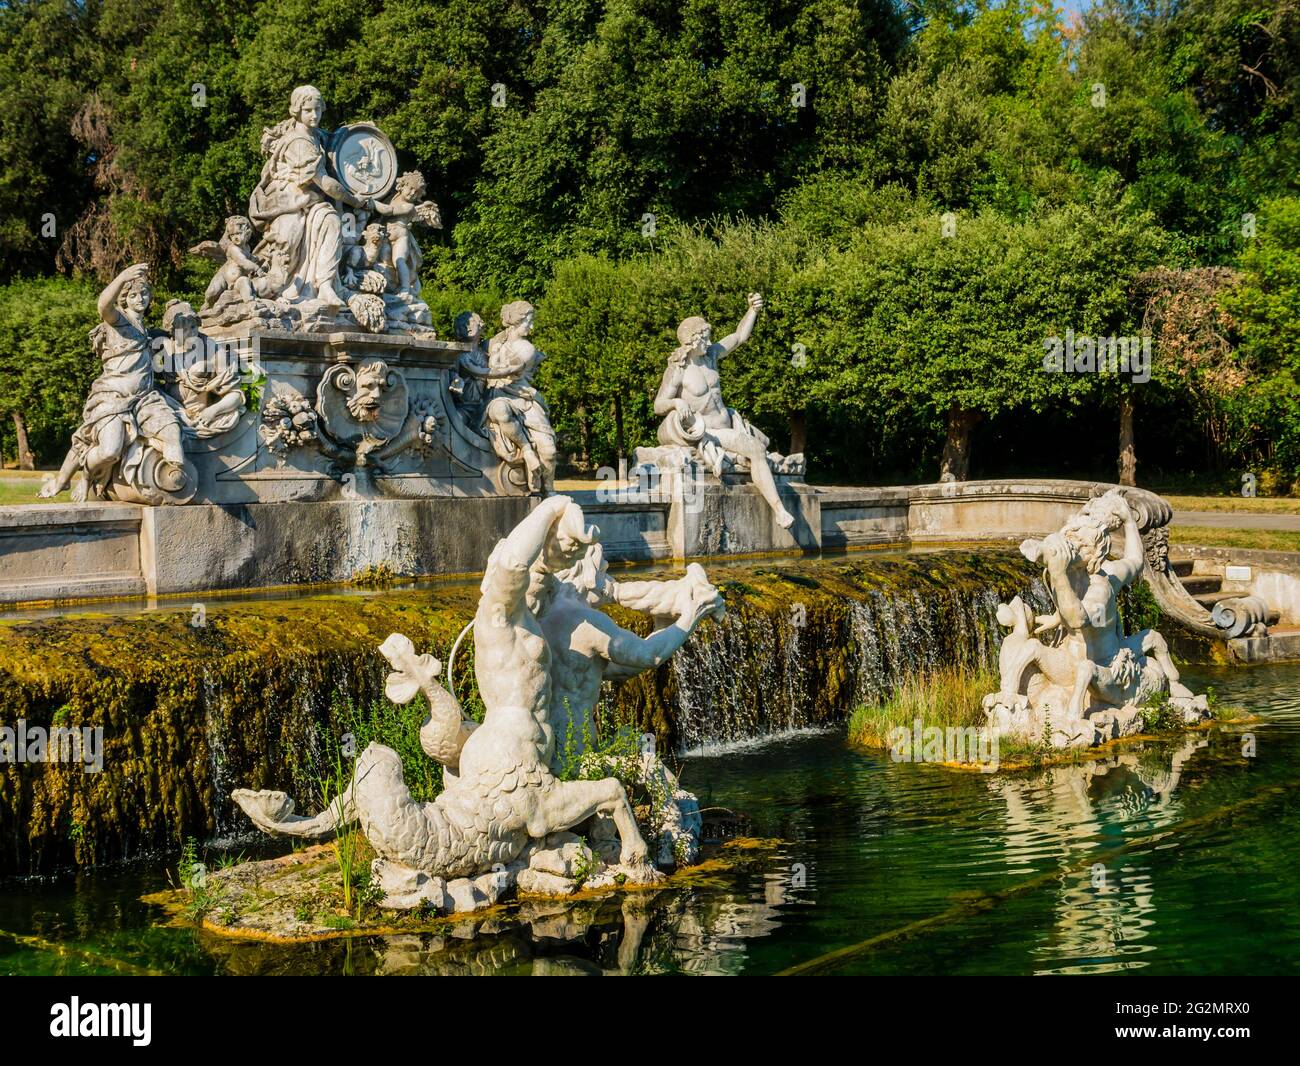 Impressive view of the fountain of Ceres, magnificent sculptural composition made using Carrara marble and travertine, Royal Palace of Caserta, Italy Stock Photo